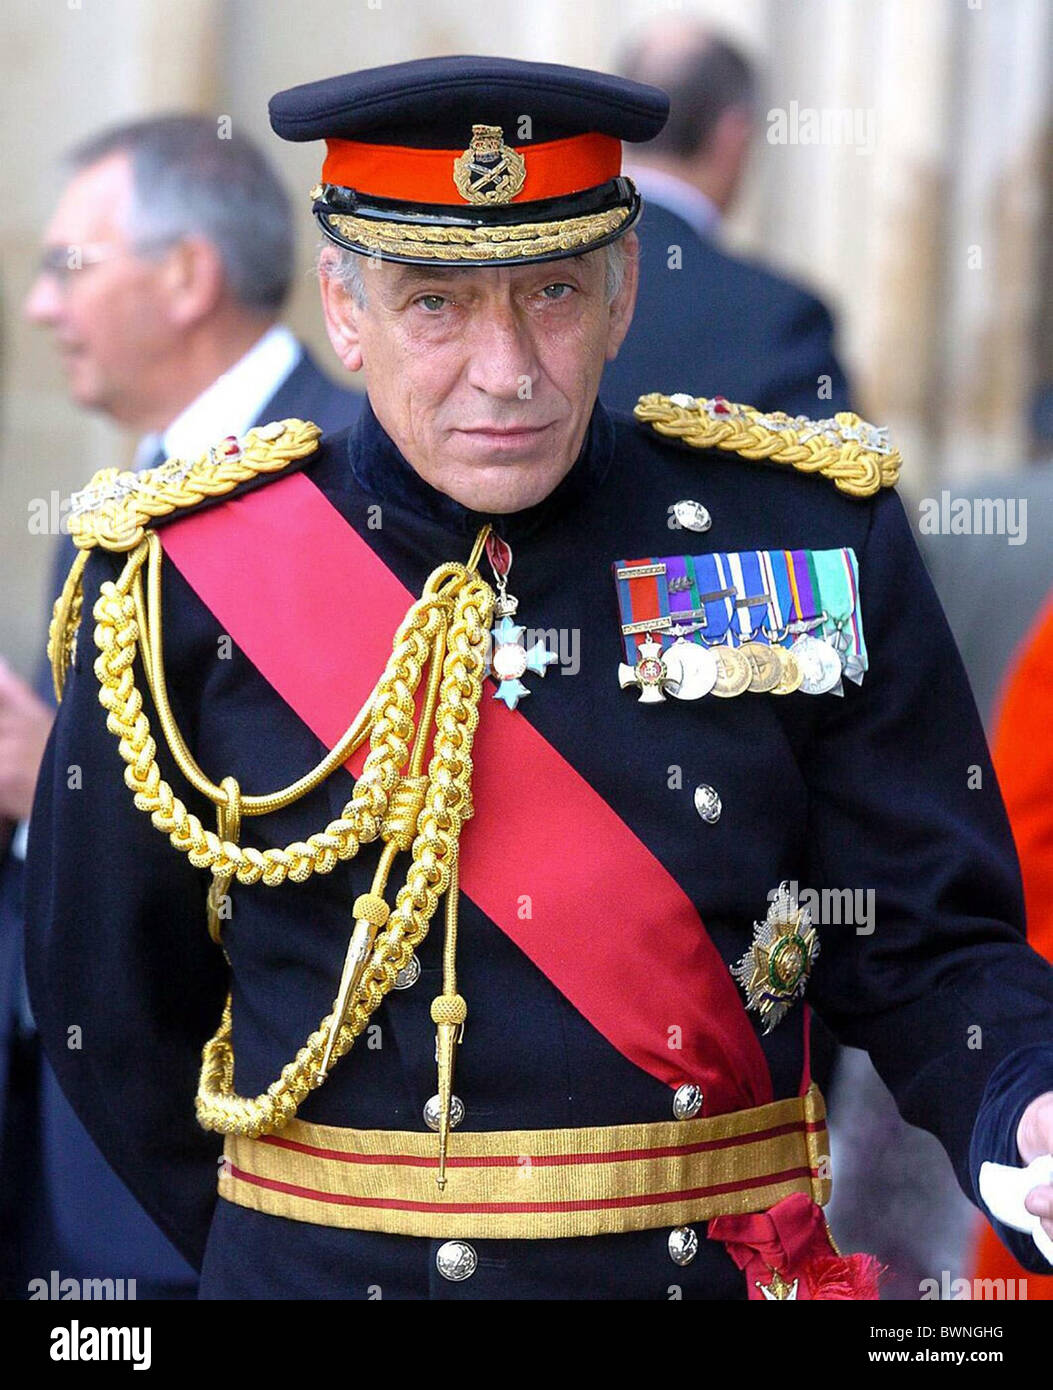 General sir michael jackson army chief medals medal uniforms hi-res photography and - Alamy